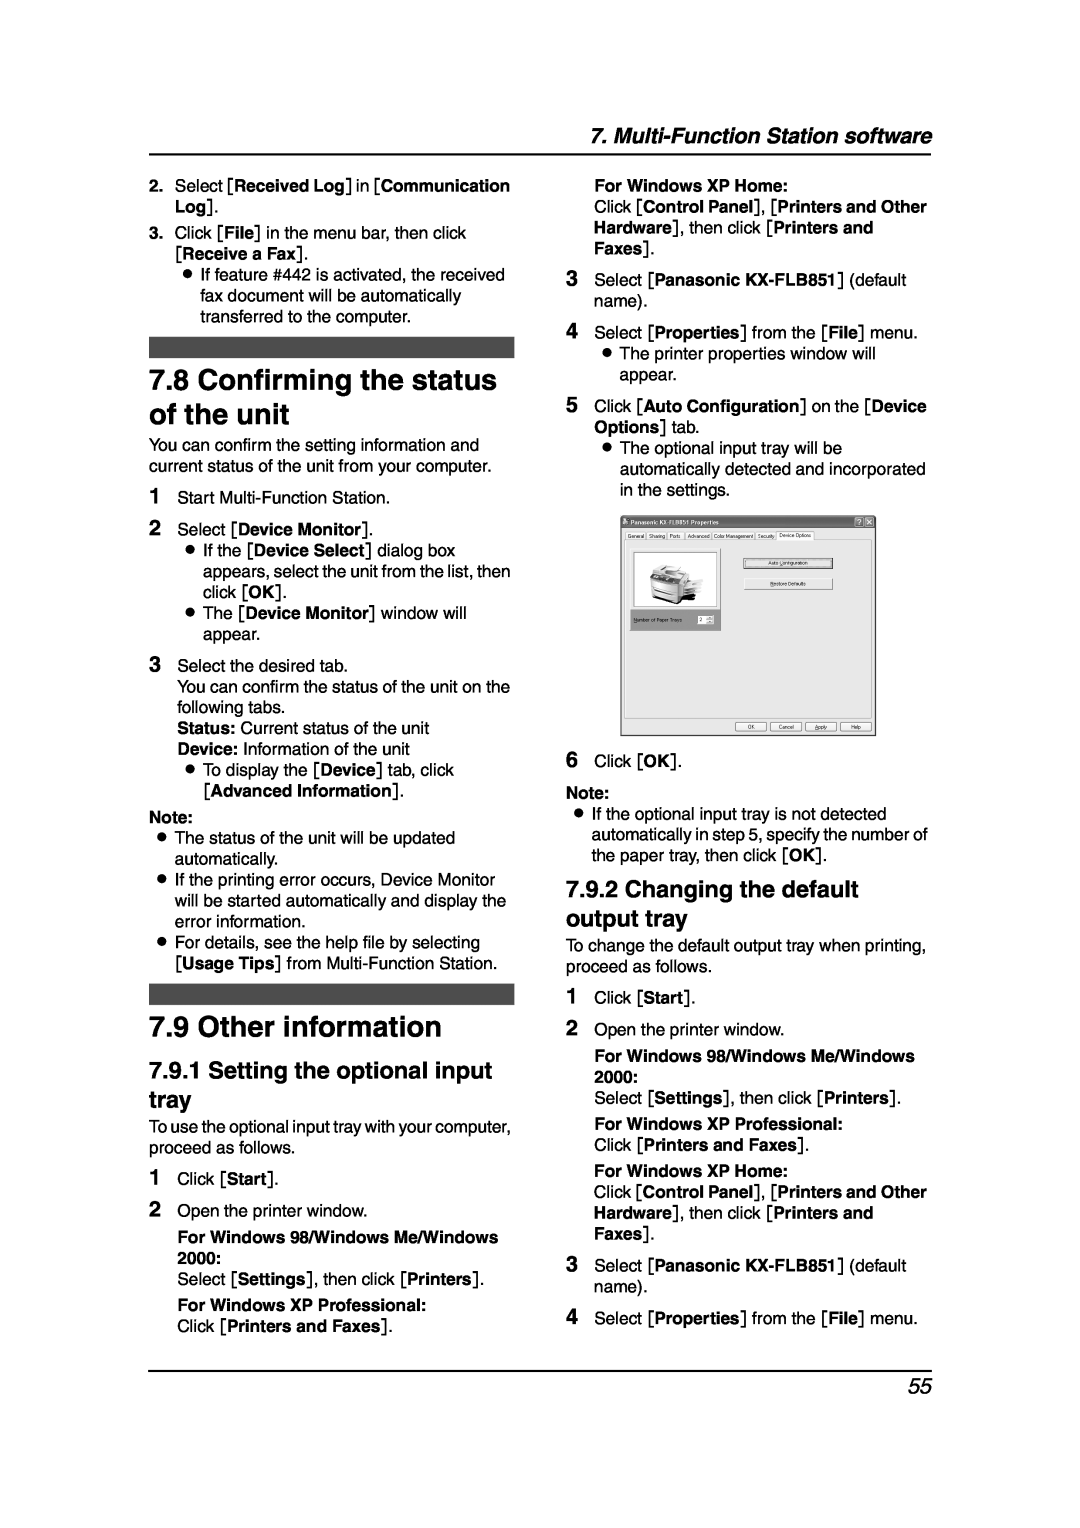 Panasonic KX-FLB851 Confirming the status of the unit, Other information, Setting the optional input tray, Receive a Fax 